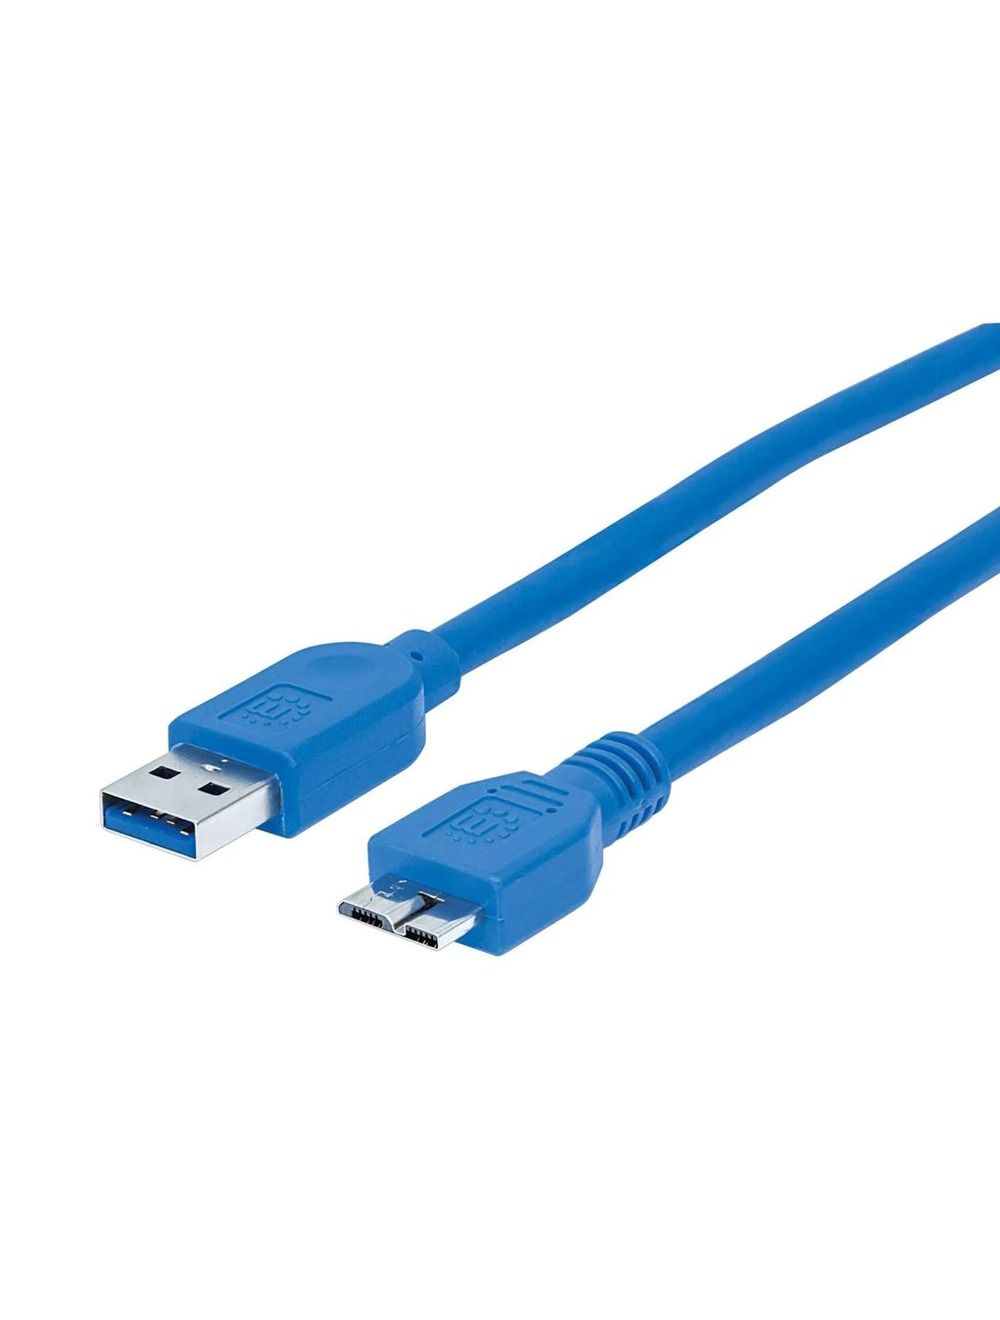 A/BMicro USB 3.0 Device Cable Blue 3 ft. 